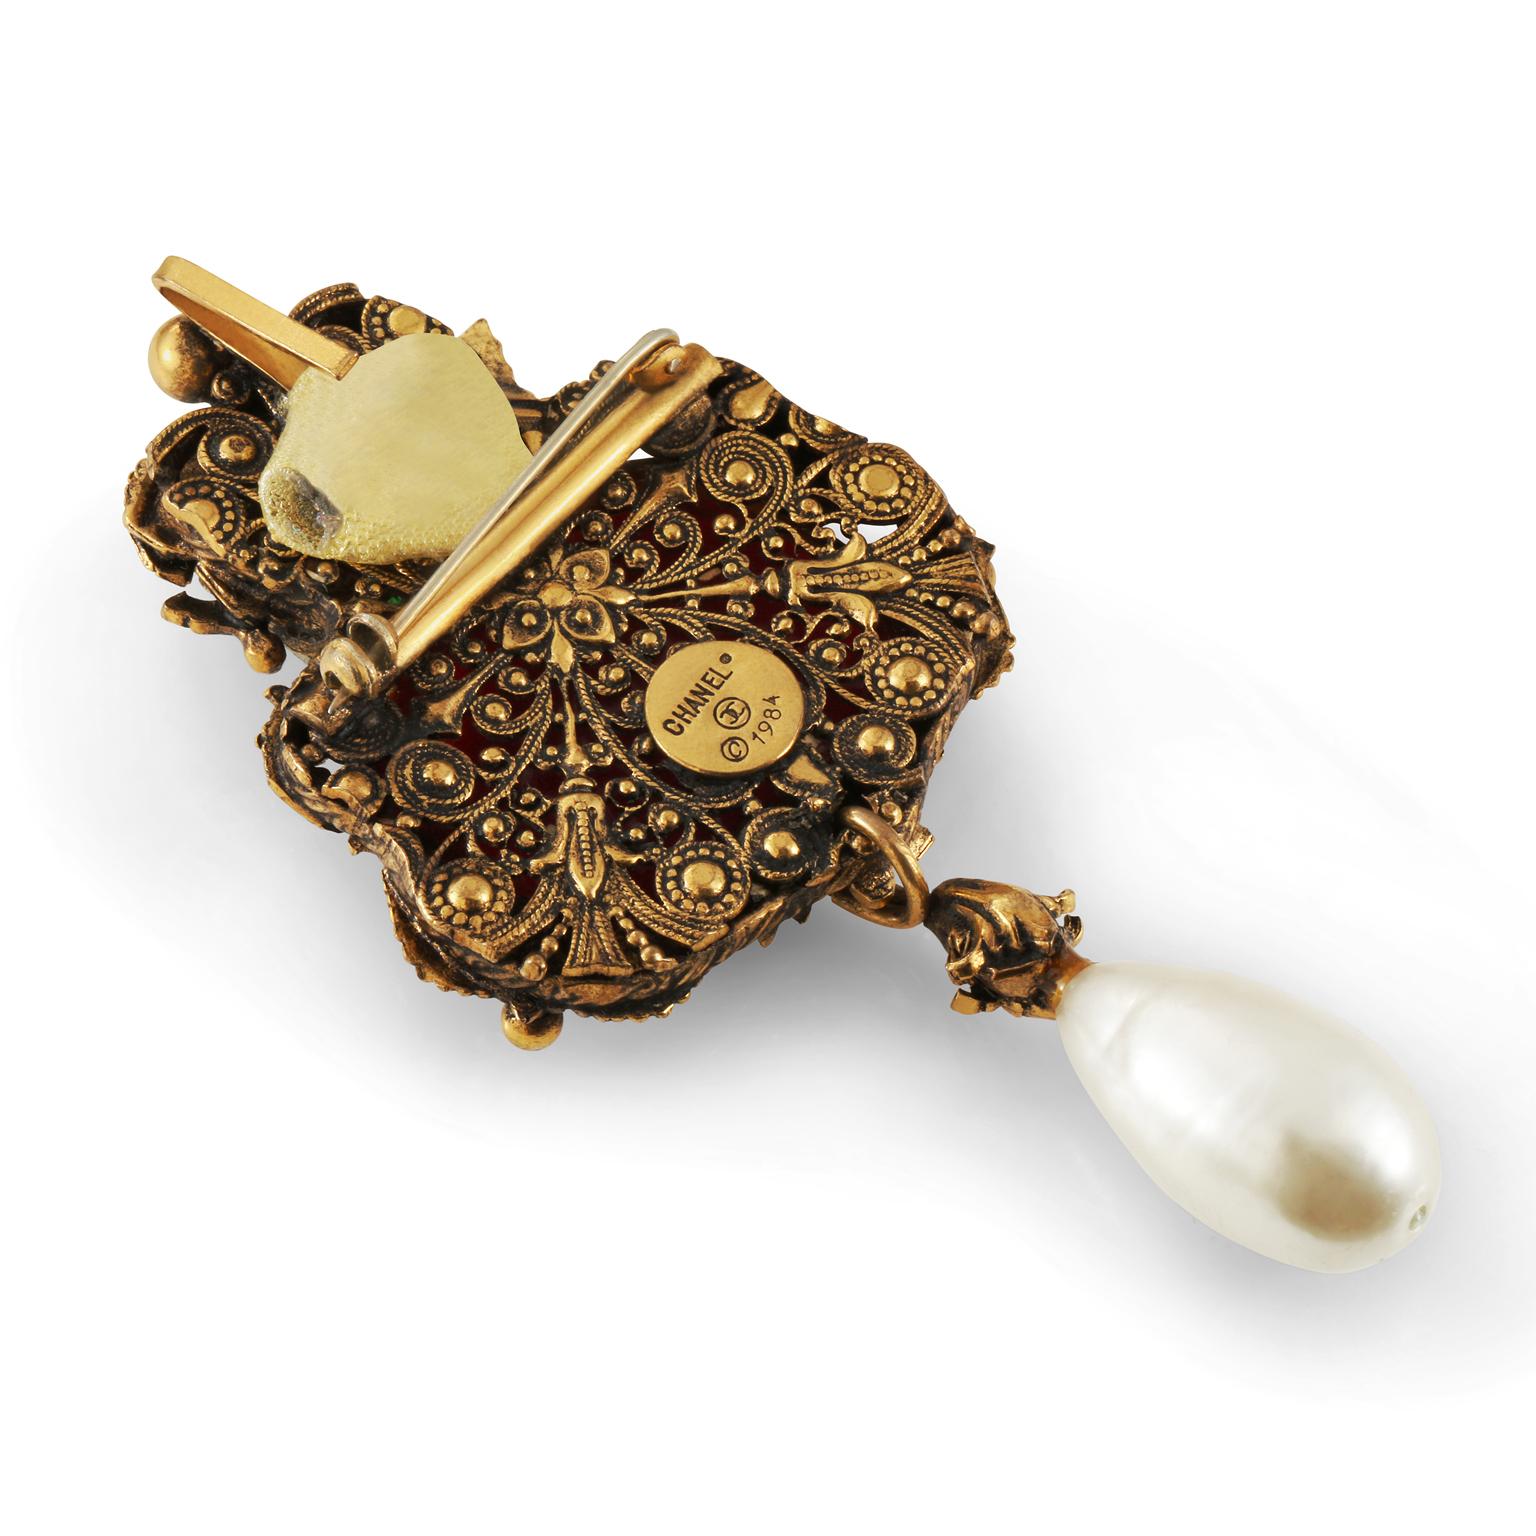 This authentic Chanel Gripoix and Pearl Baroque Brooch is in beautiful vintage condition from the 1984 collection.  Large red and green emerald cut Gripoix glass stones have ornate gold surround.  A faux teardrop pearl dangles from the bottom. 